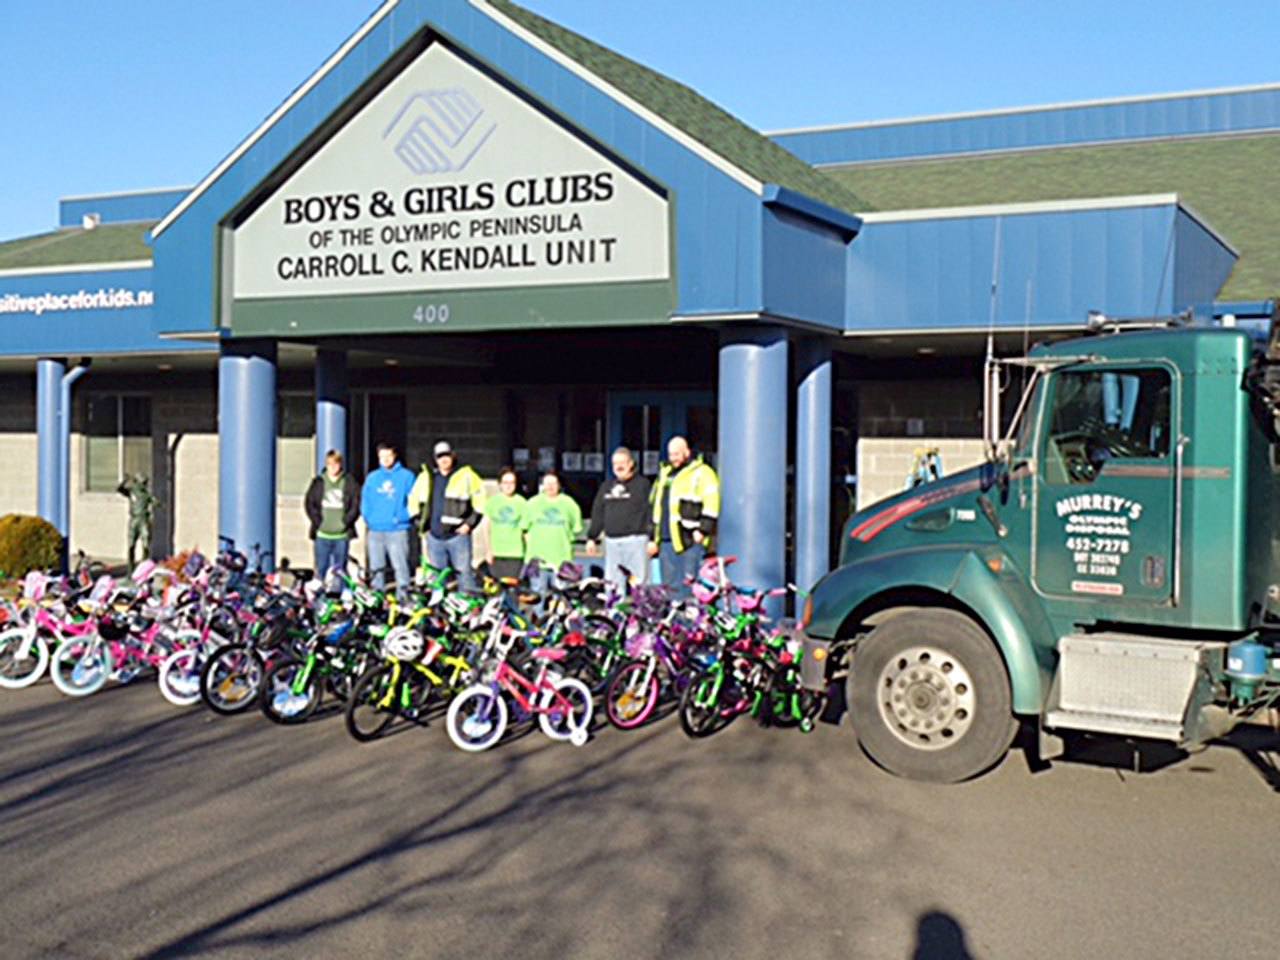 Employees of Murrey’s Olympic Disposal, Inc., of Port Angeles assembled and delivered 65 bikes for children in need that were then donated to and distributed by Boys & Girls Clubs of the Olympic Peninsula.